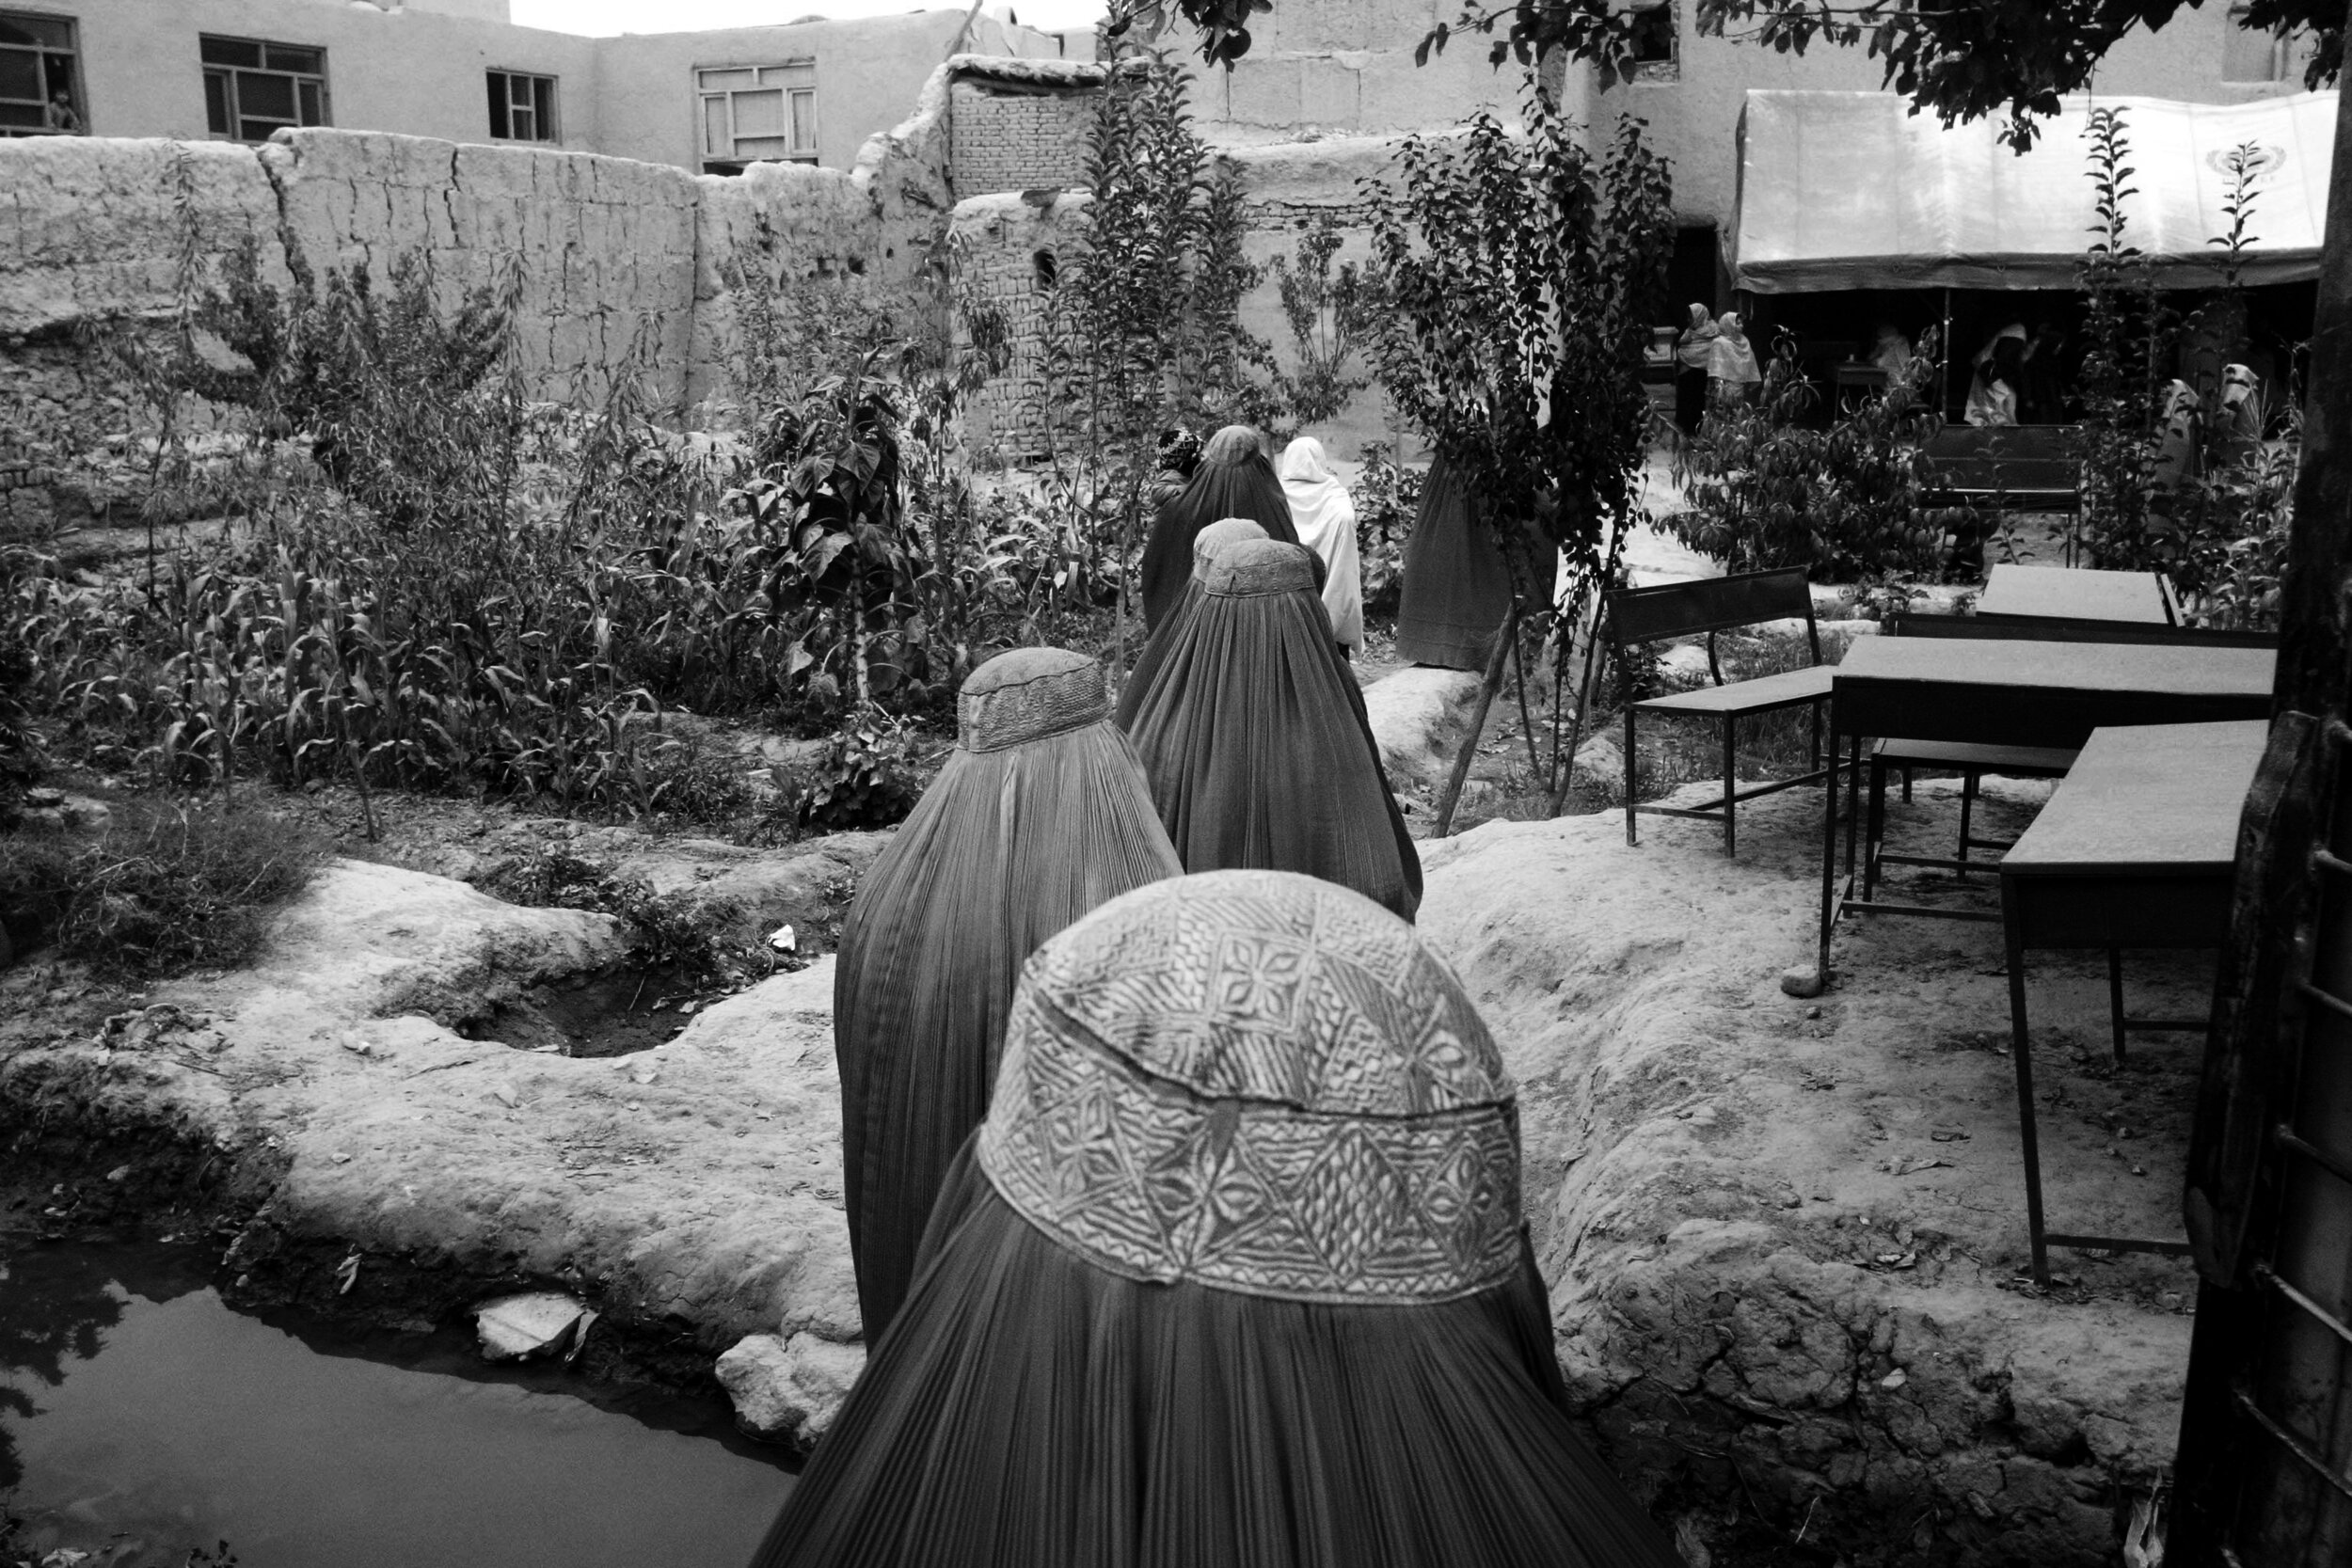  In the village of Dehnow, an hour south of Kabul, women line up in the courtyard of a family home to vote on October 9, 2004. © Andrea Bruce/NOOR Images 